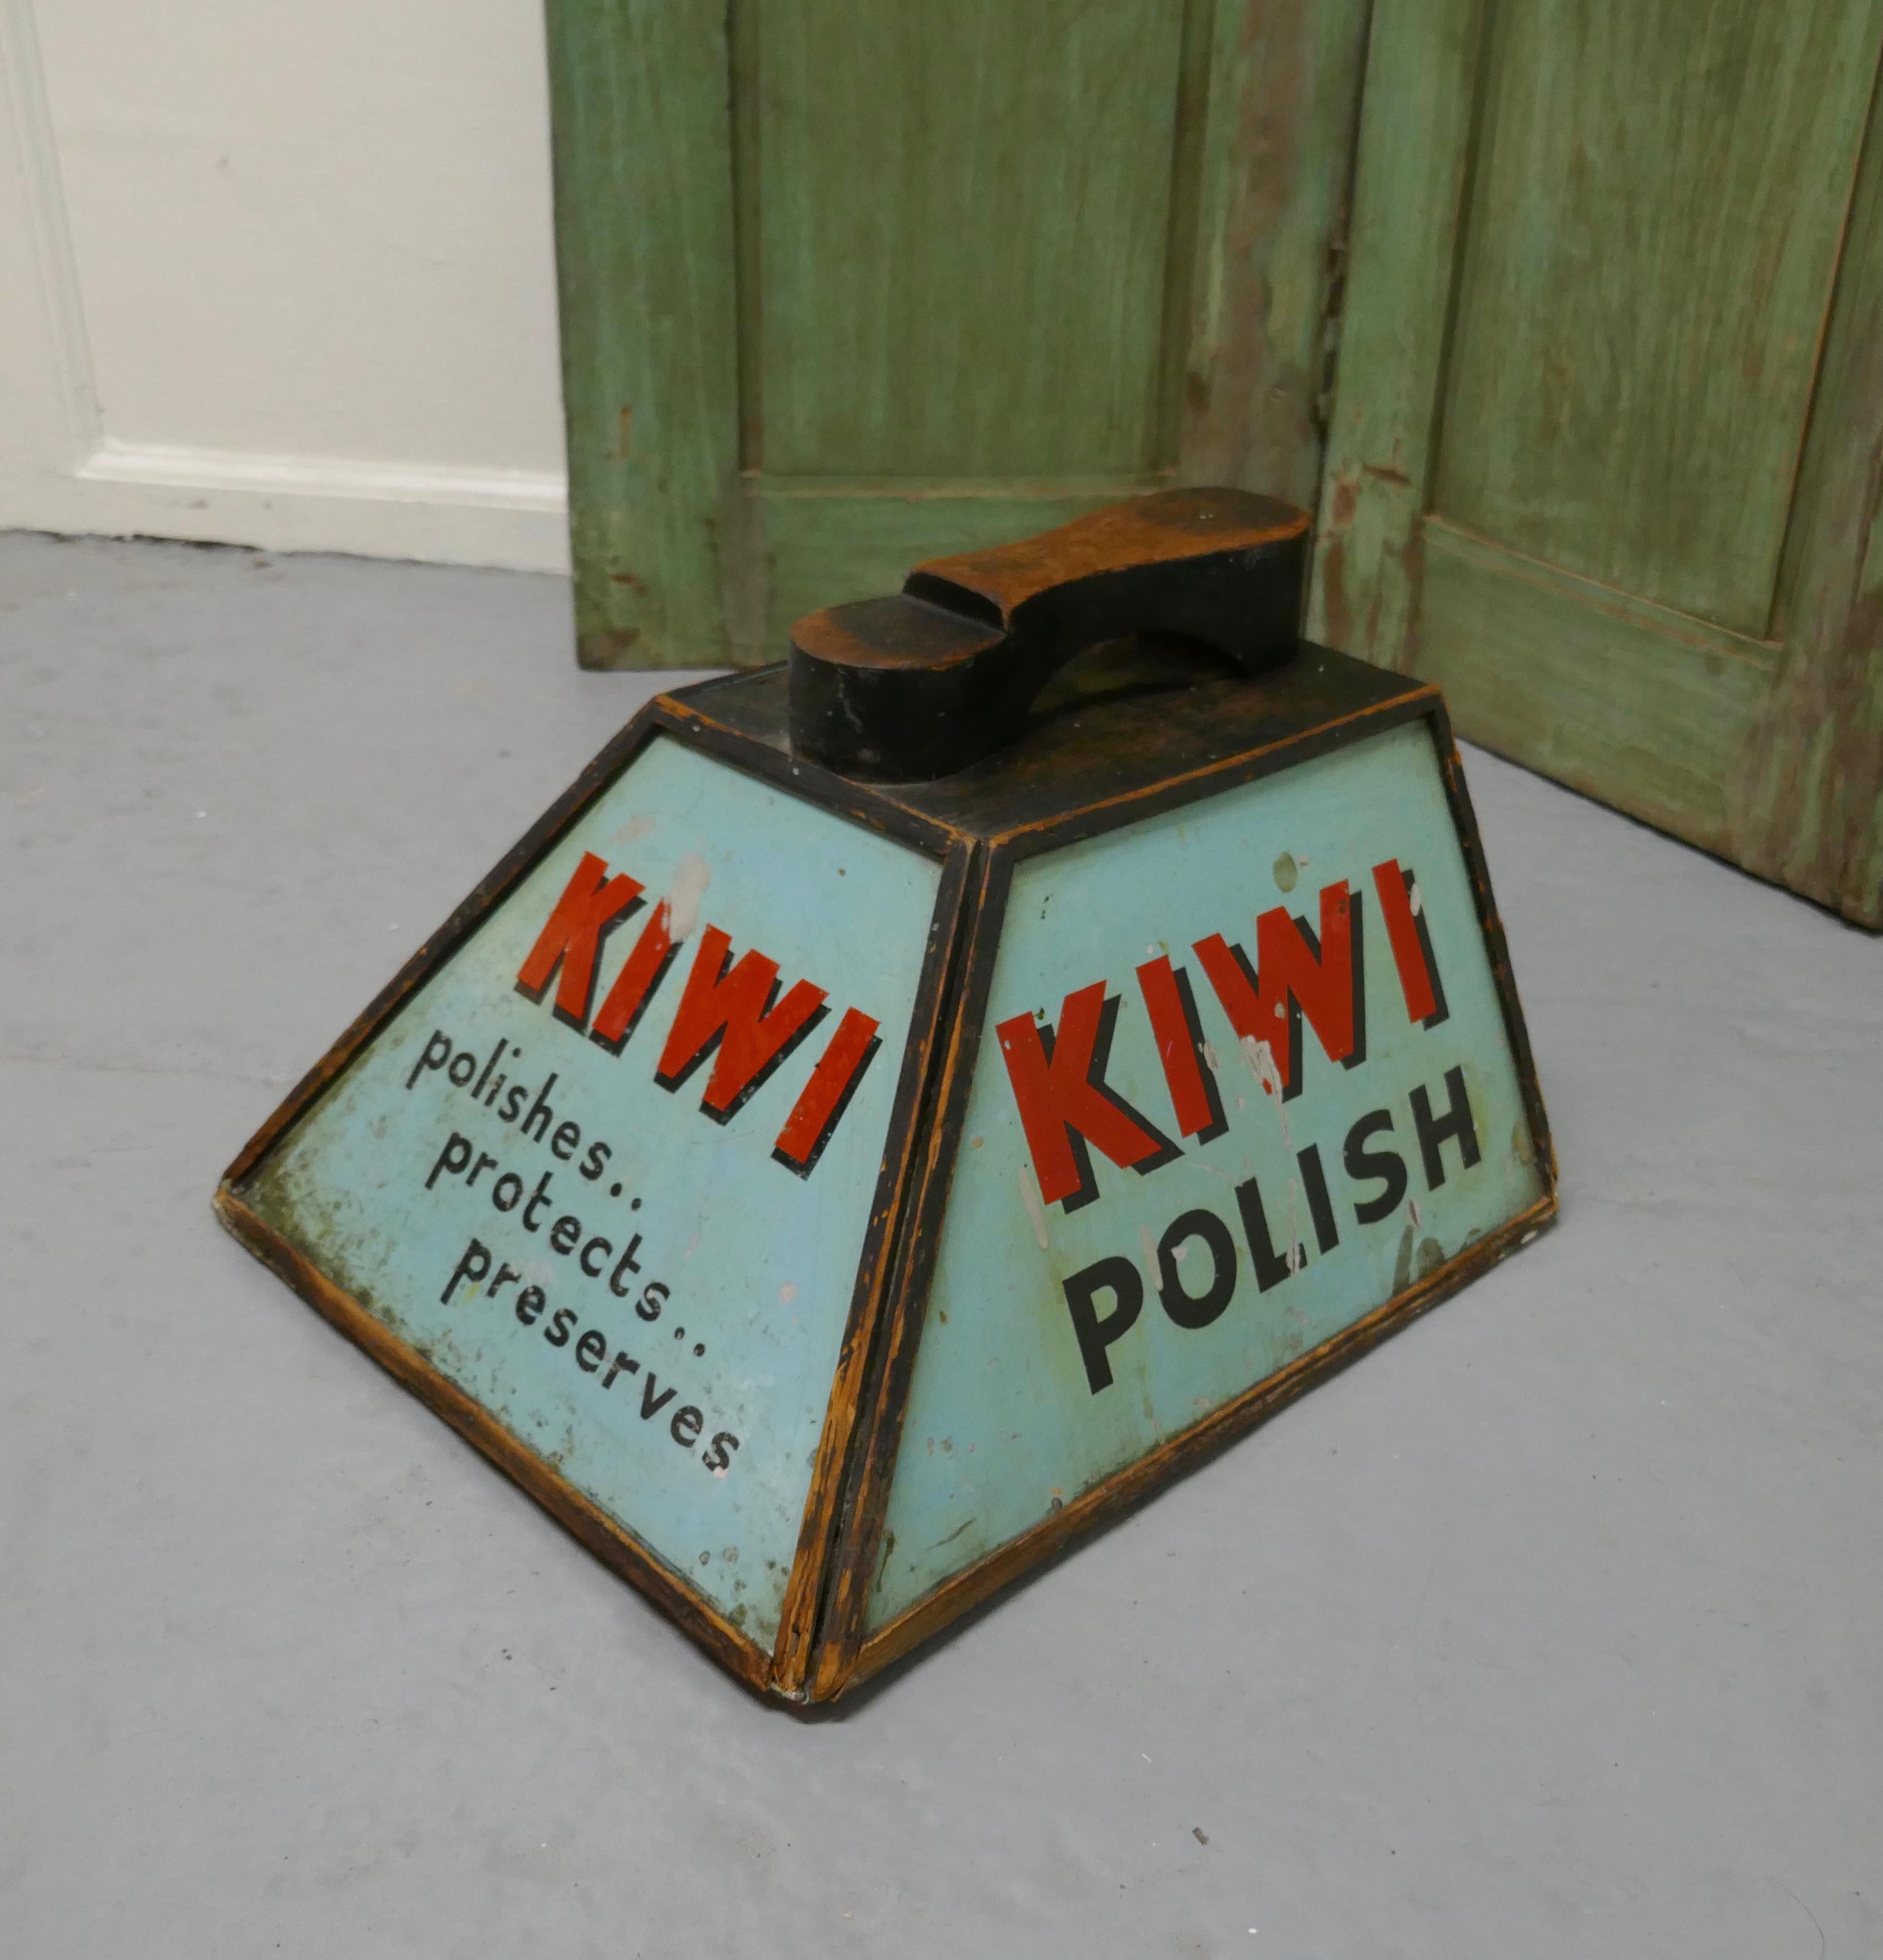 Kiwi Boot polish advertising shoe cleaning box with shoe rest

A handy and attractive little piece, the handle of the polish box doubles up as a rest to put the foot on to polish the shoes, 3 of the sides have enameled advertising signs for Kiwi